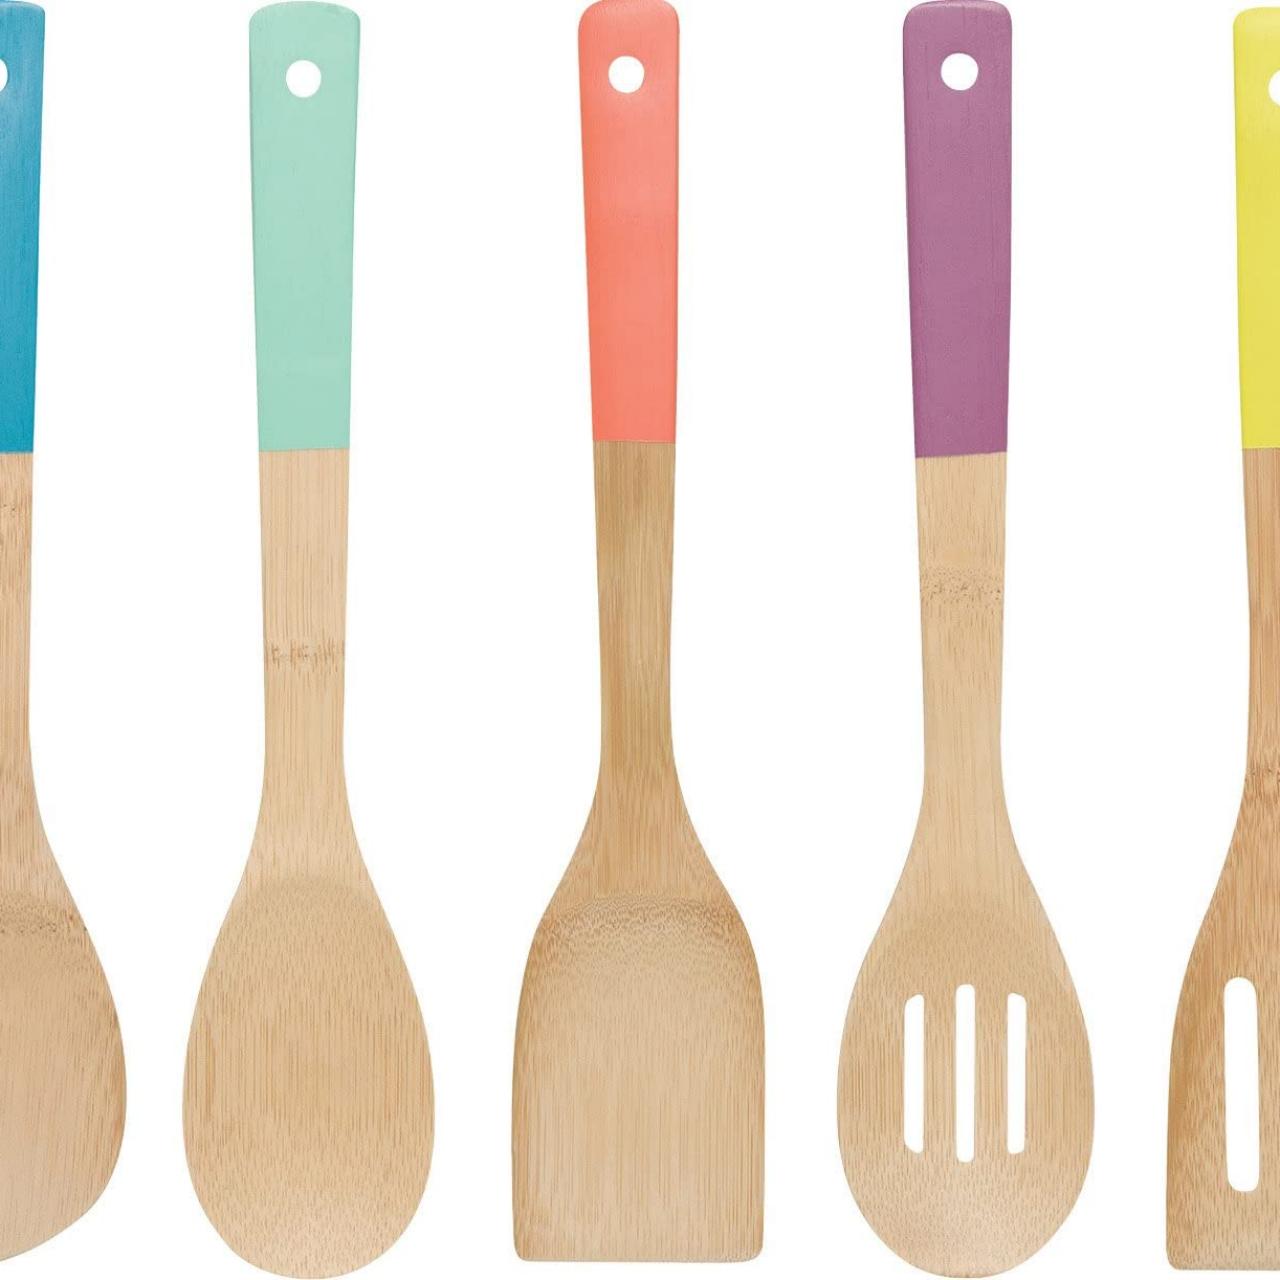 https://food.fnr.sndimg.com/content/dam/images/food/products/2021/1/8/rx_now-designs-bamboo-utensils.jpeg.rend.hgtvcom.1280.1280.suffix/1610126422291.jpeg